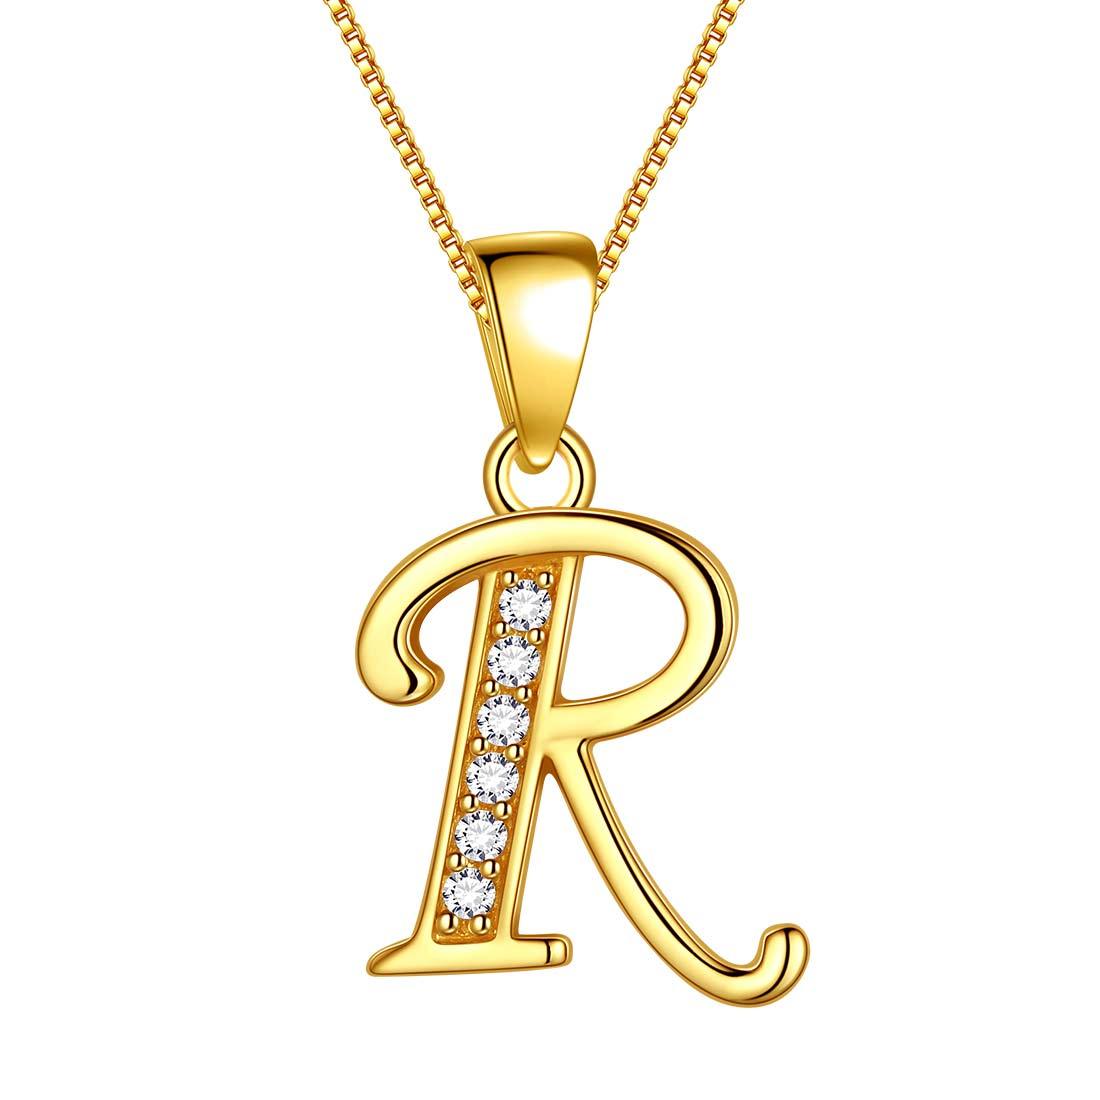 Wholesale New XX letter Pendant Hip Hop Necklace 24 Inch Chain Gold Silver  plated Initial Necklace Men Jewelry From m.